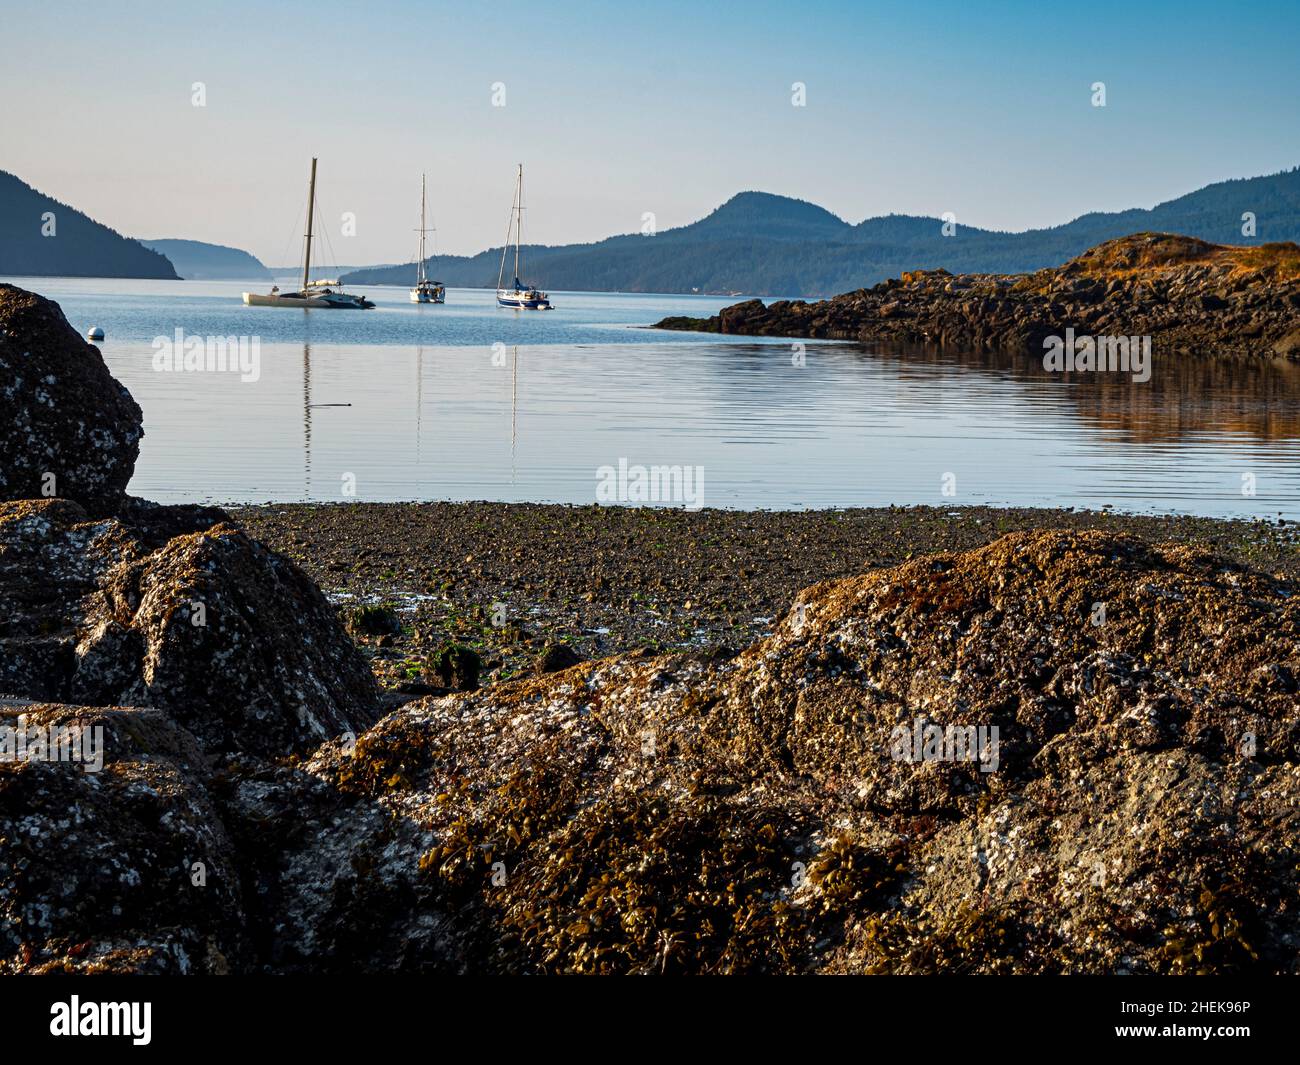 WA21065-00...WASHINGTON - Barnacle covered rocks on the beach at Eastsound on Orcas Island, part of the San Juans Islands group. Stock Photo